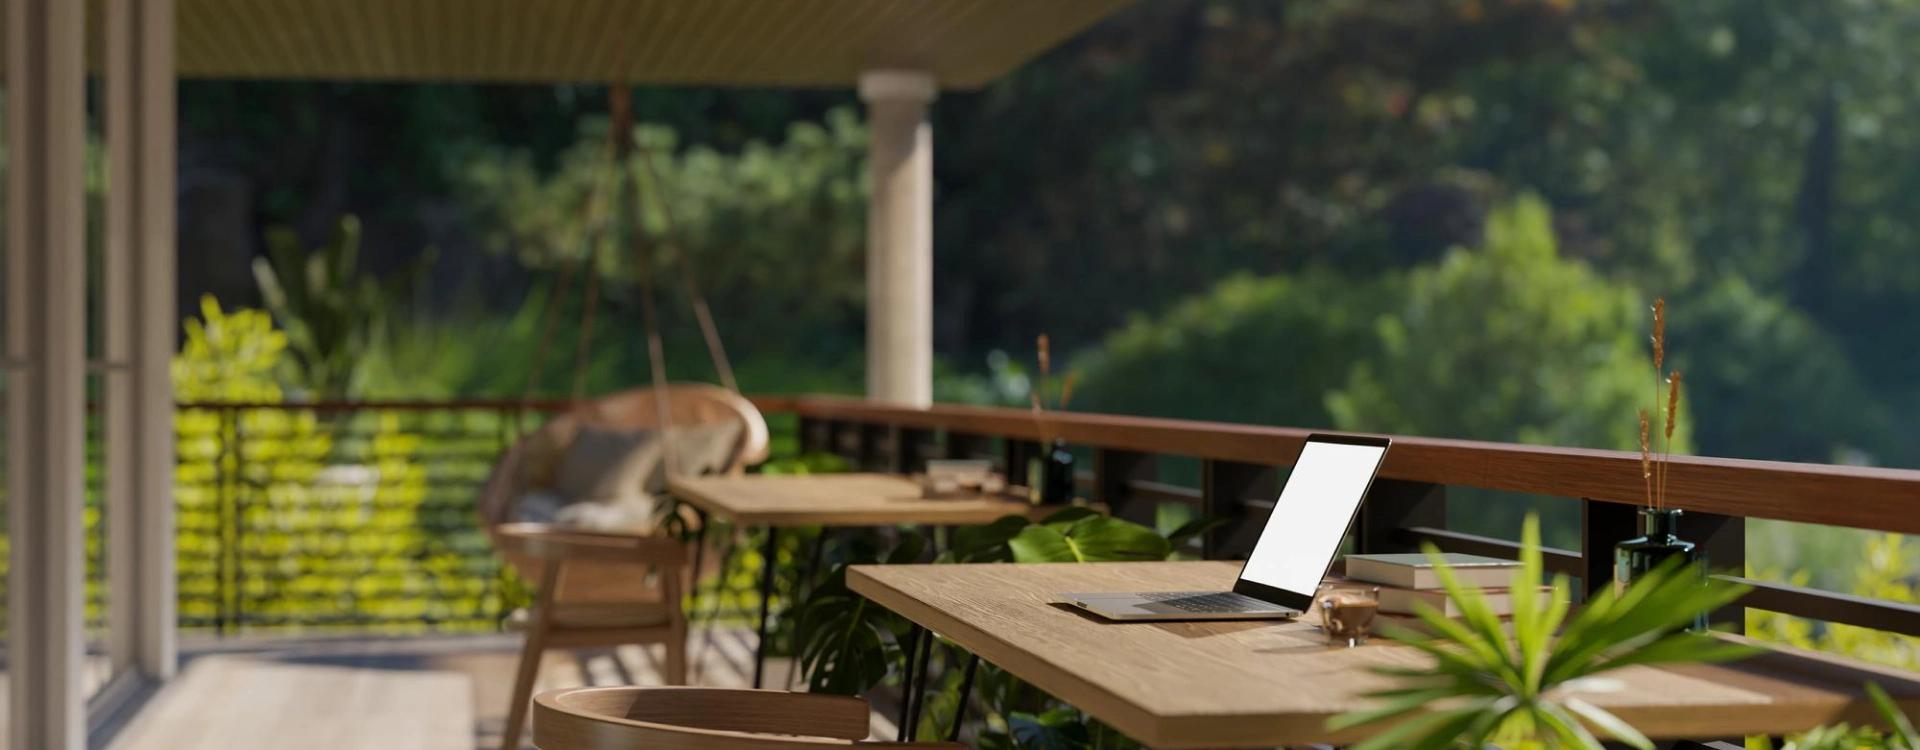 Laptop on outdoor table in serene setting